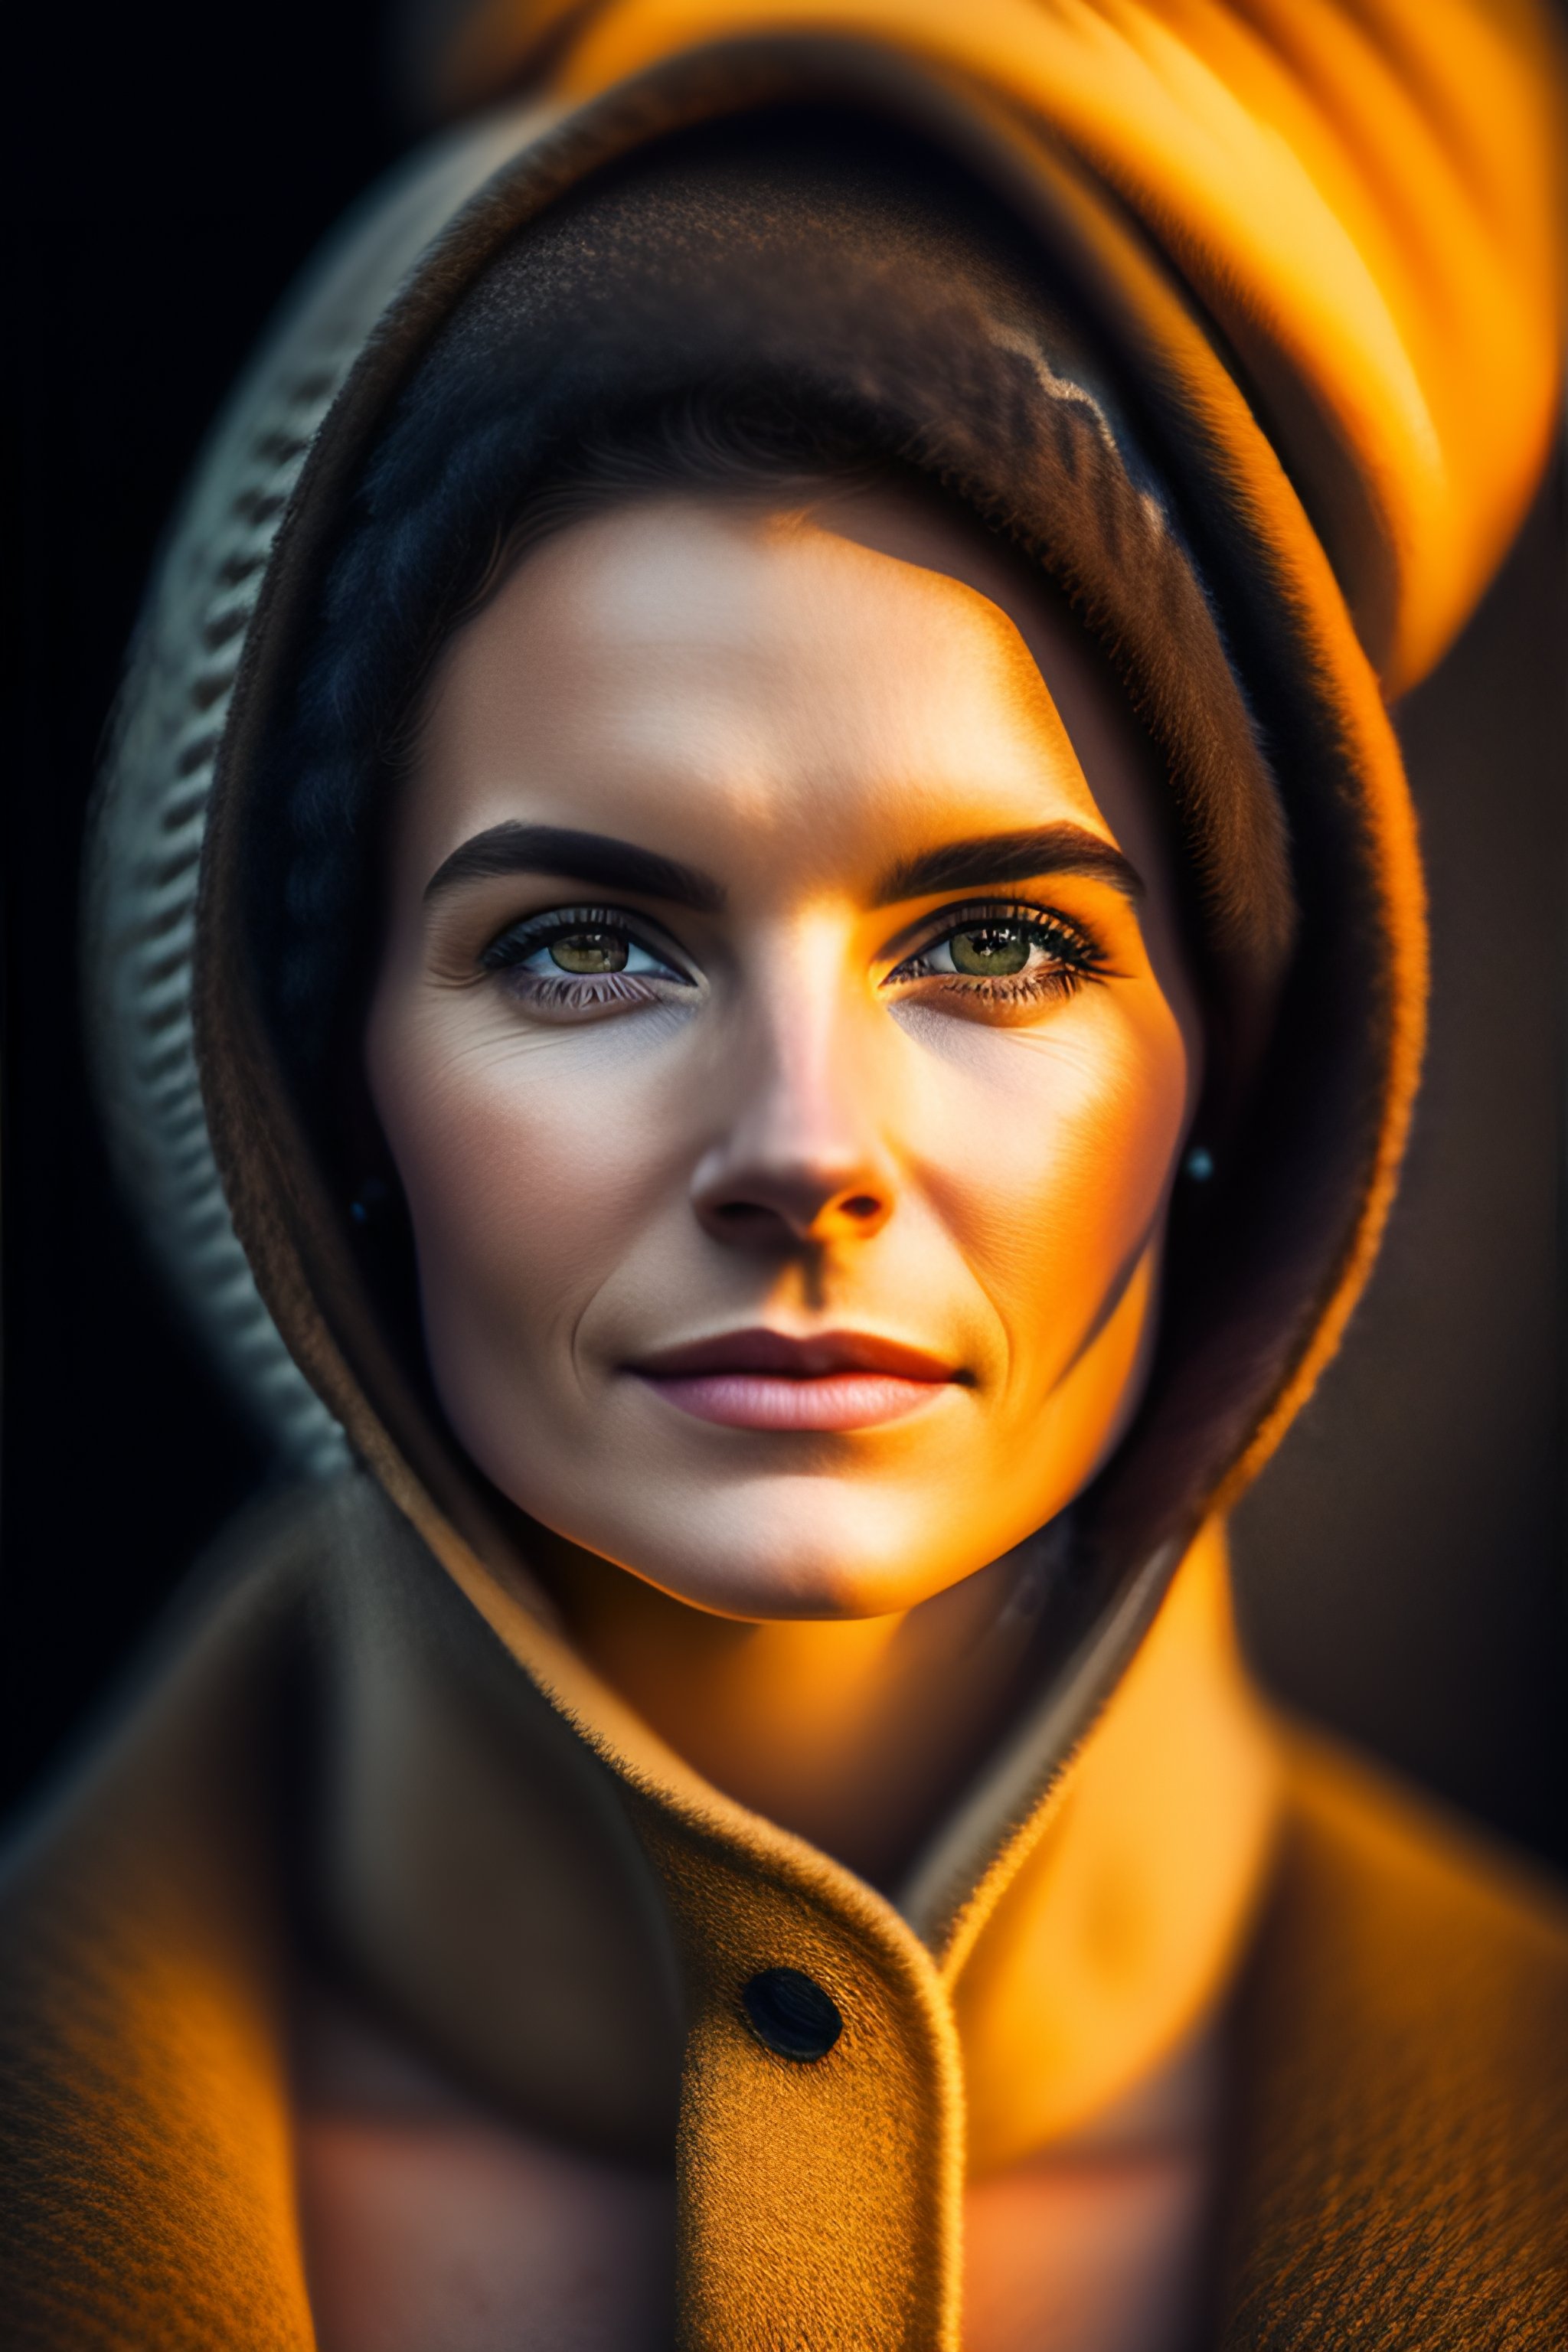 Lexica - An ultra-realistic close-up portrait photograph of a 19th ...